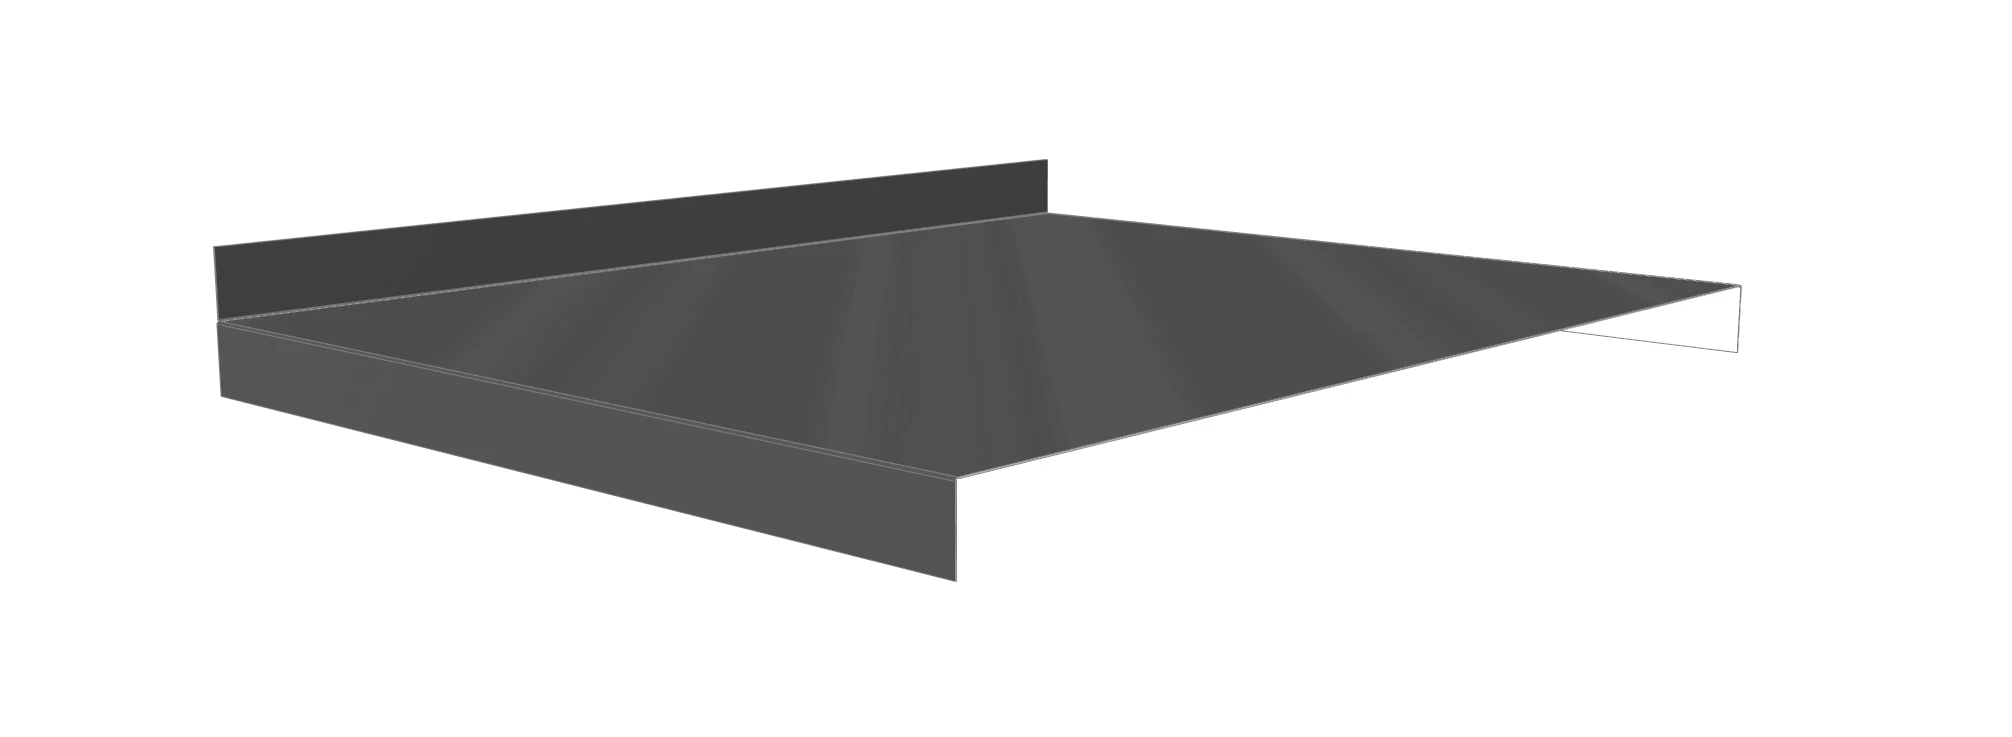 Flashings for a roof system